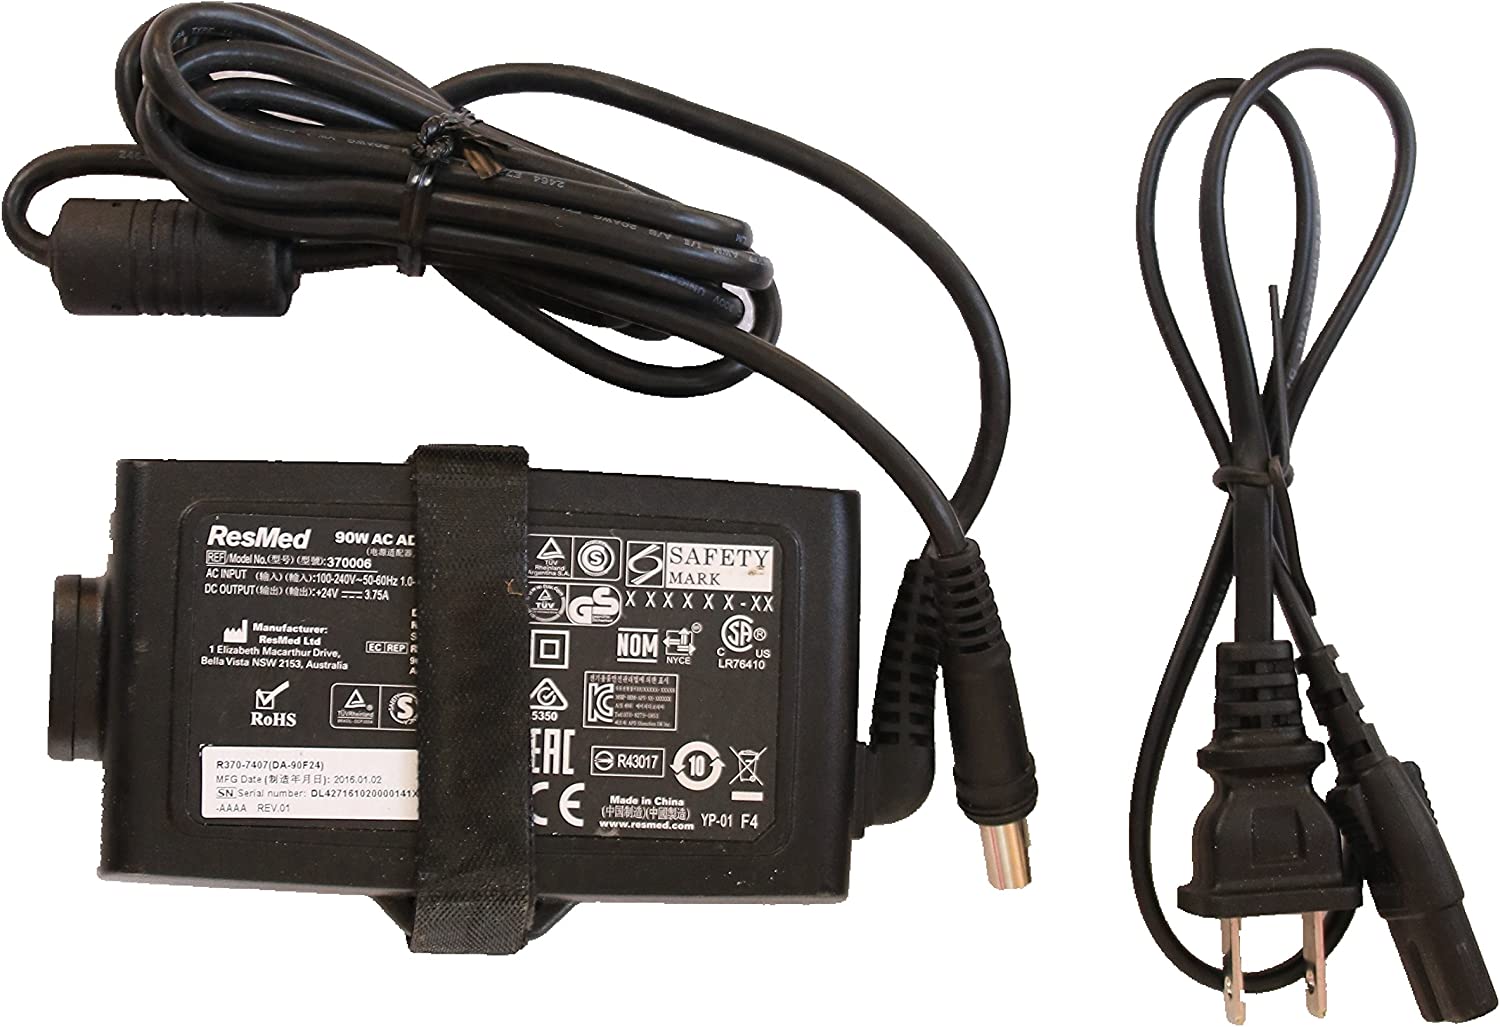 AC DC Adapter For Resmed S10 Series ResMed Airsense 10 Air sense S10 AirCurve 10 Series CPAP and BiPAP Machines,90W Resm